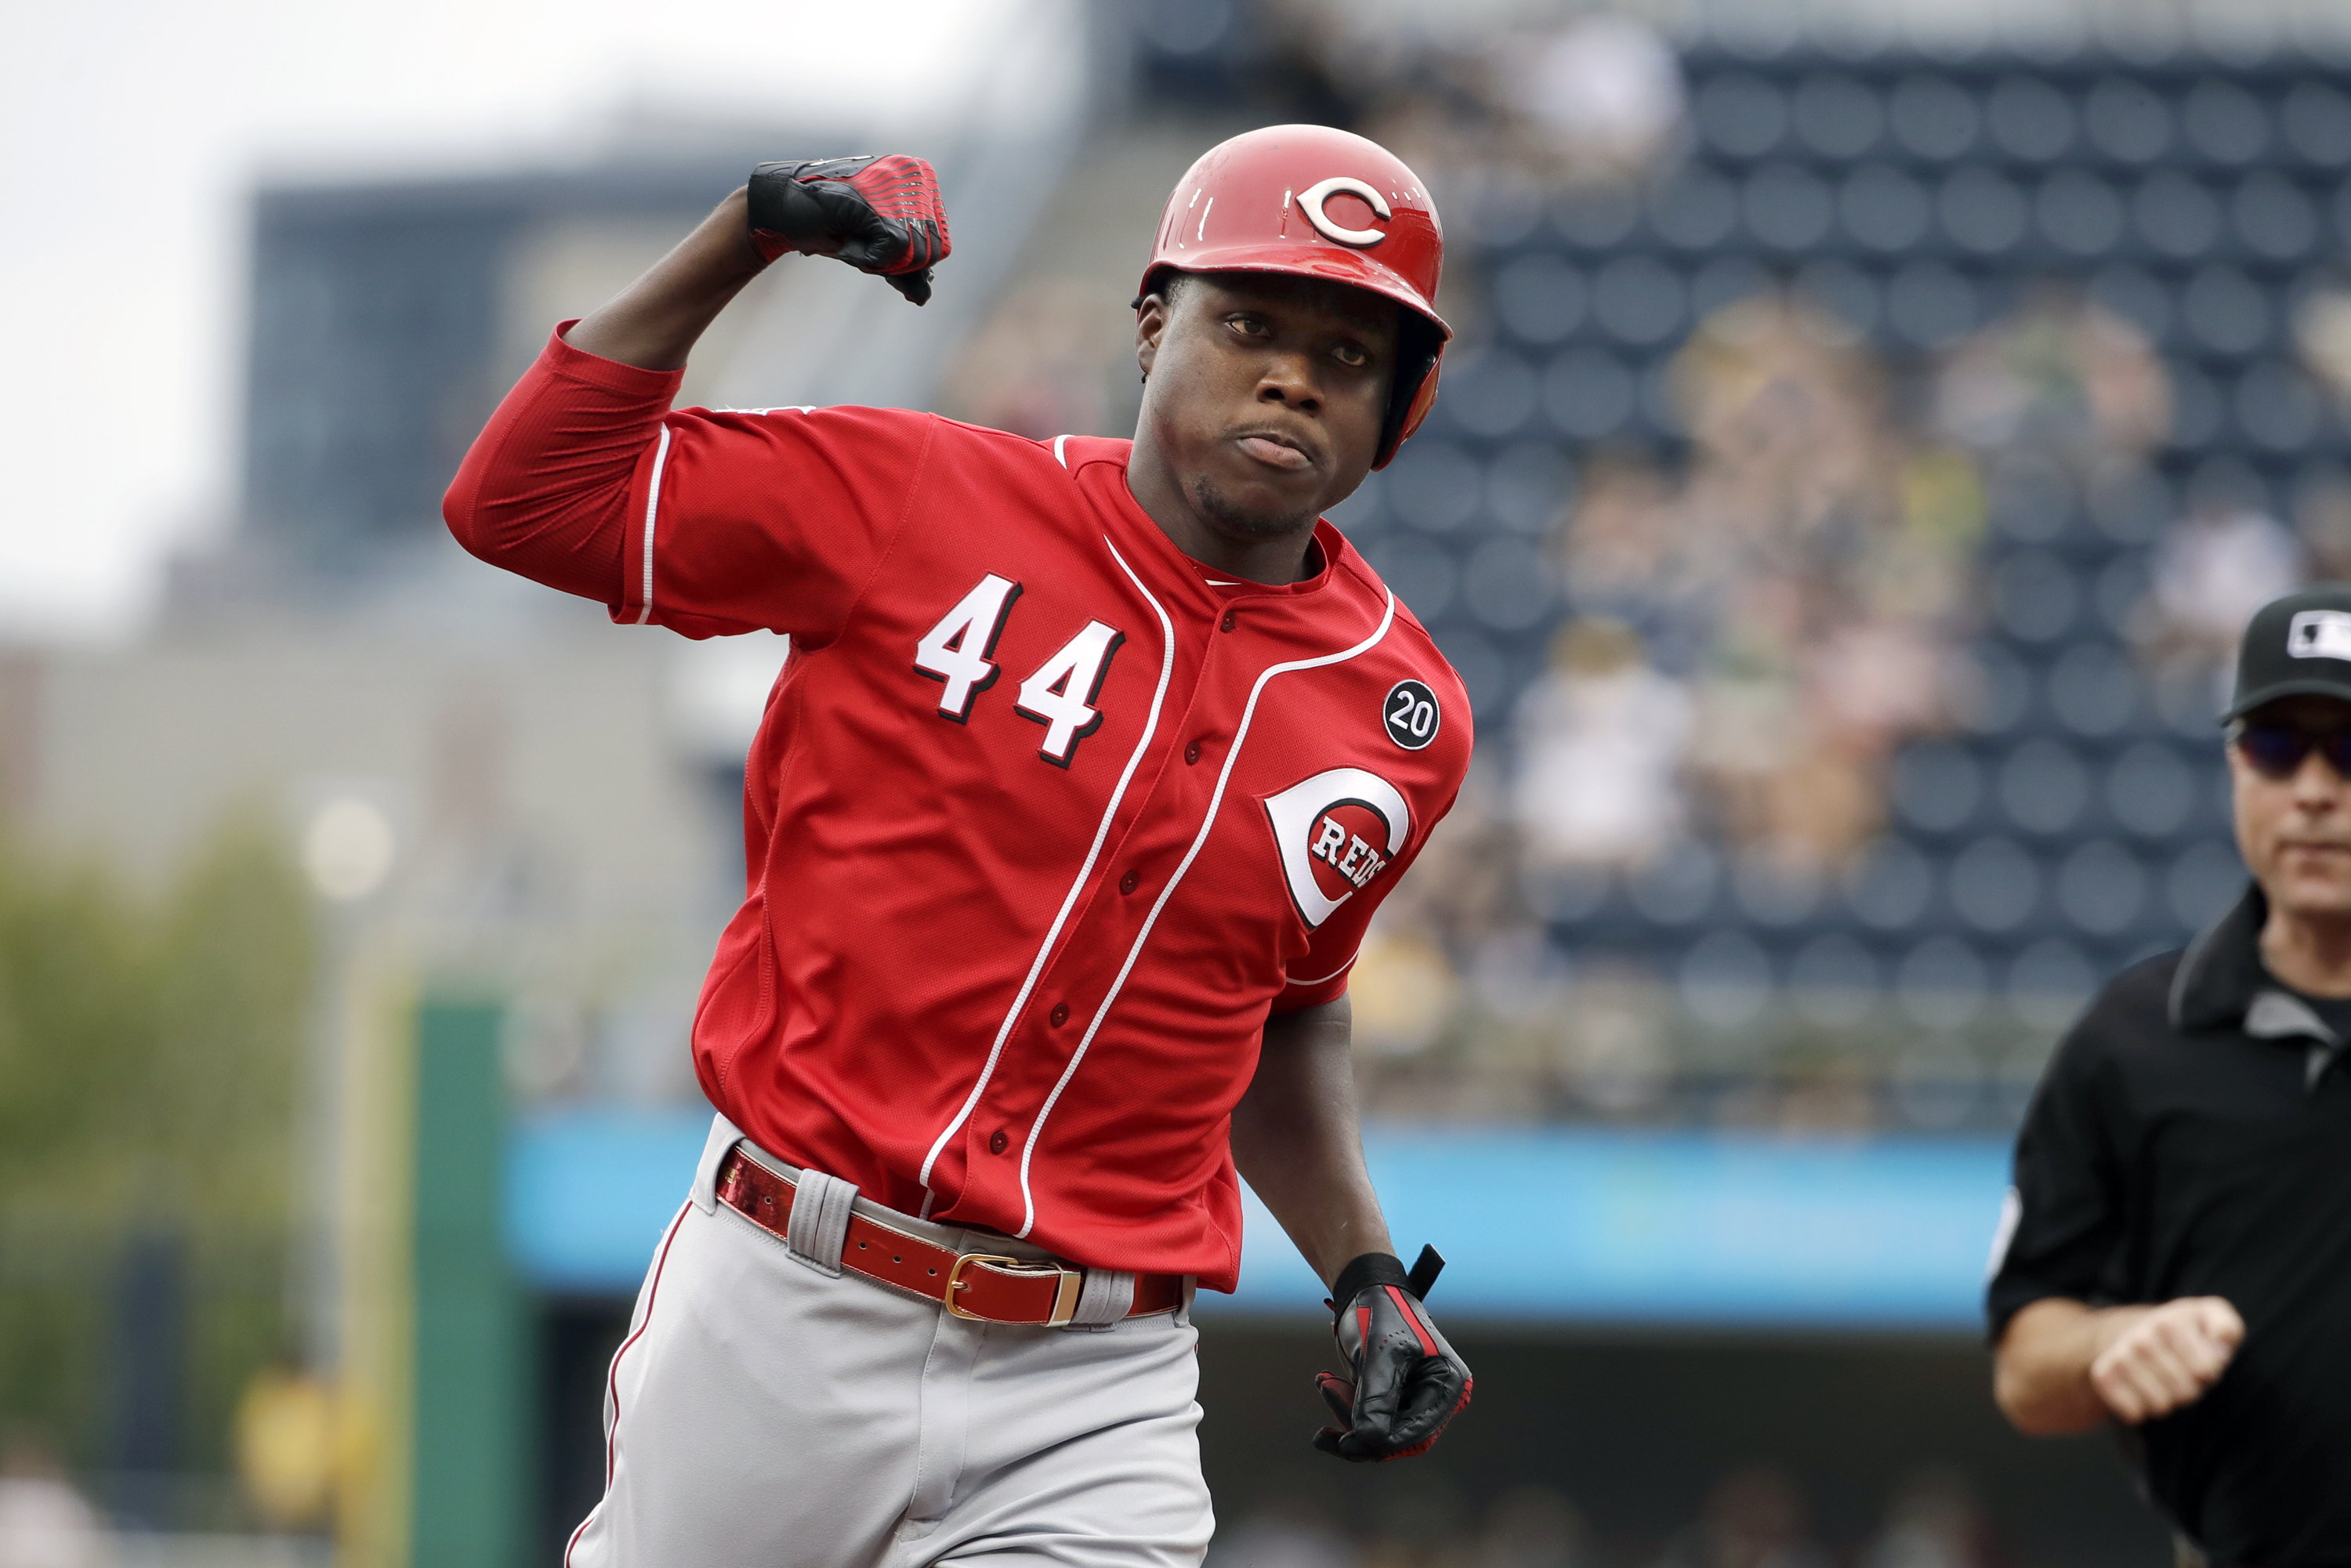 Hurdle fired, Reds beat Pirates 3-1 in season finale